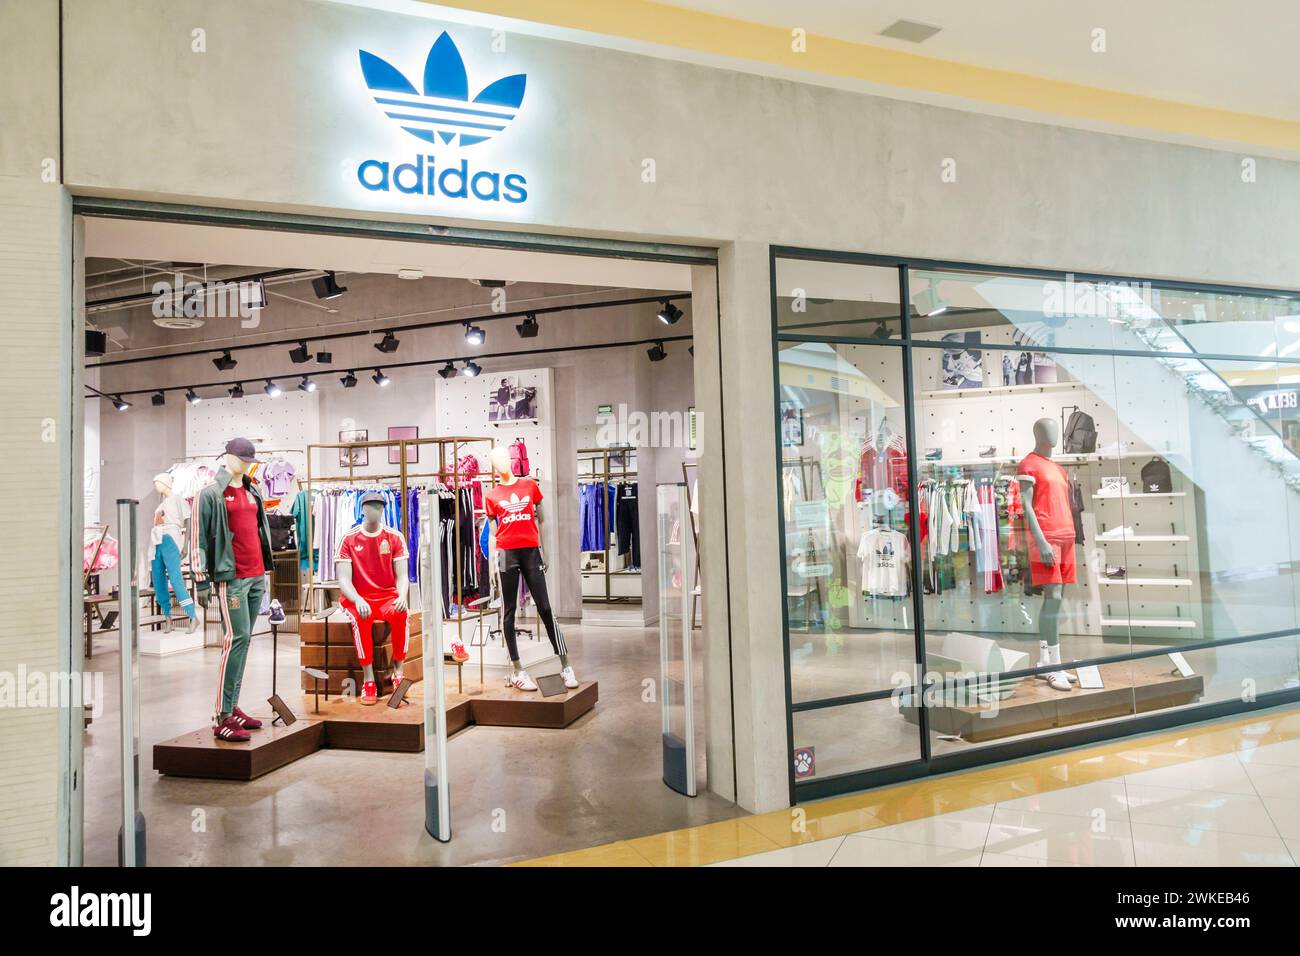 Merida Mexico,Zona Industrial,Galerias Merida shopping mall,inside interior,Adidas athletic shoes sportswear,store stores business businesses merchant Stock Photo